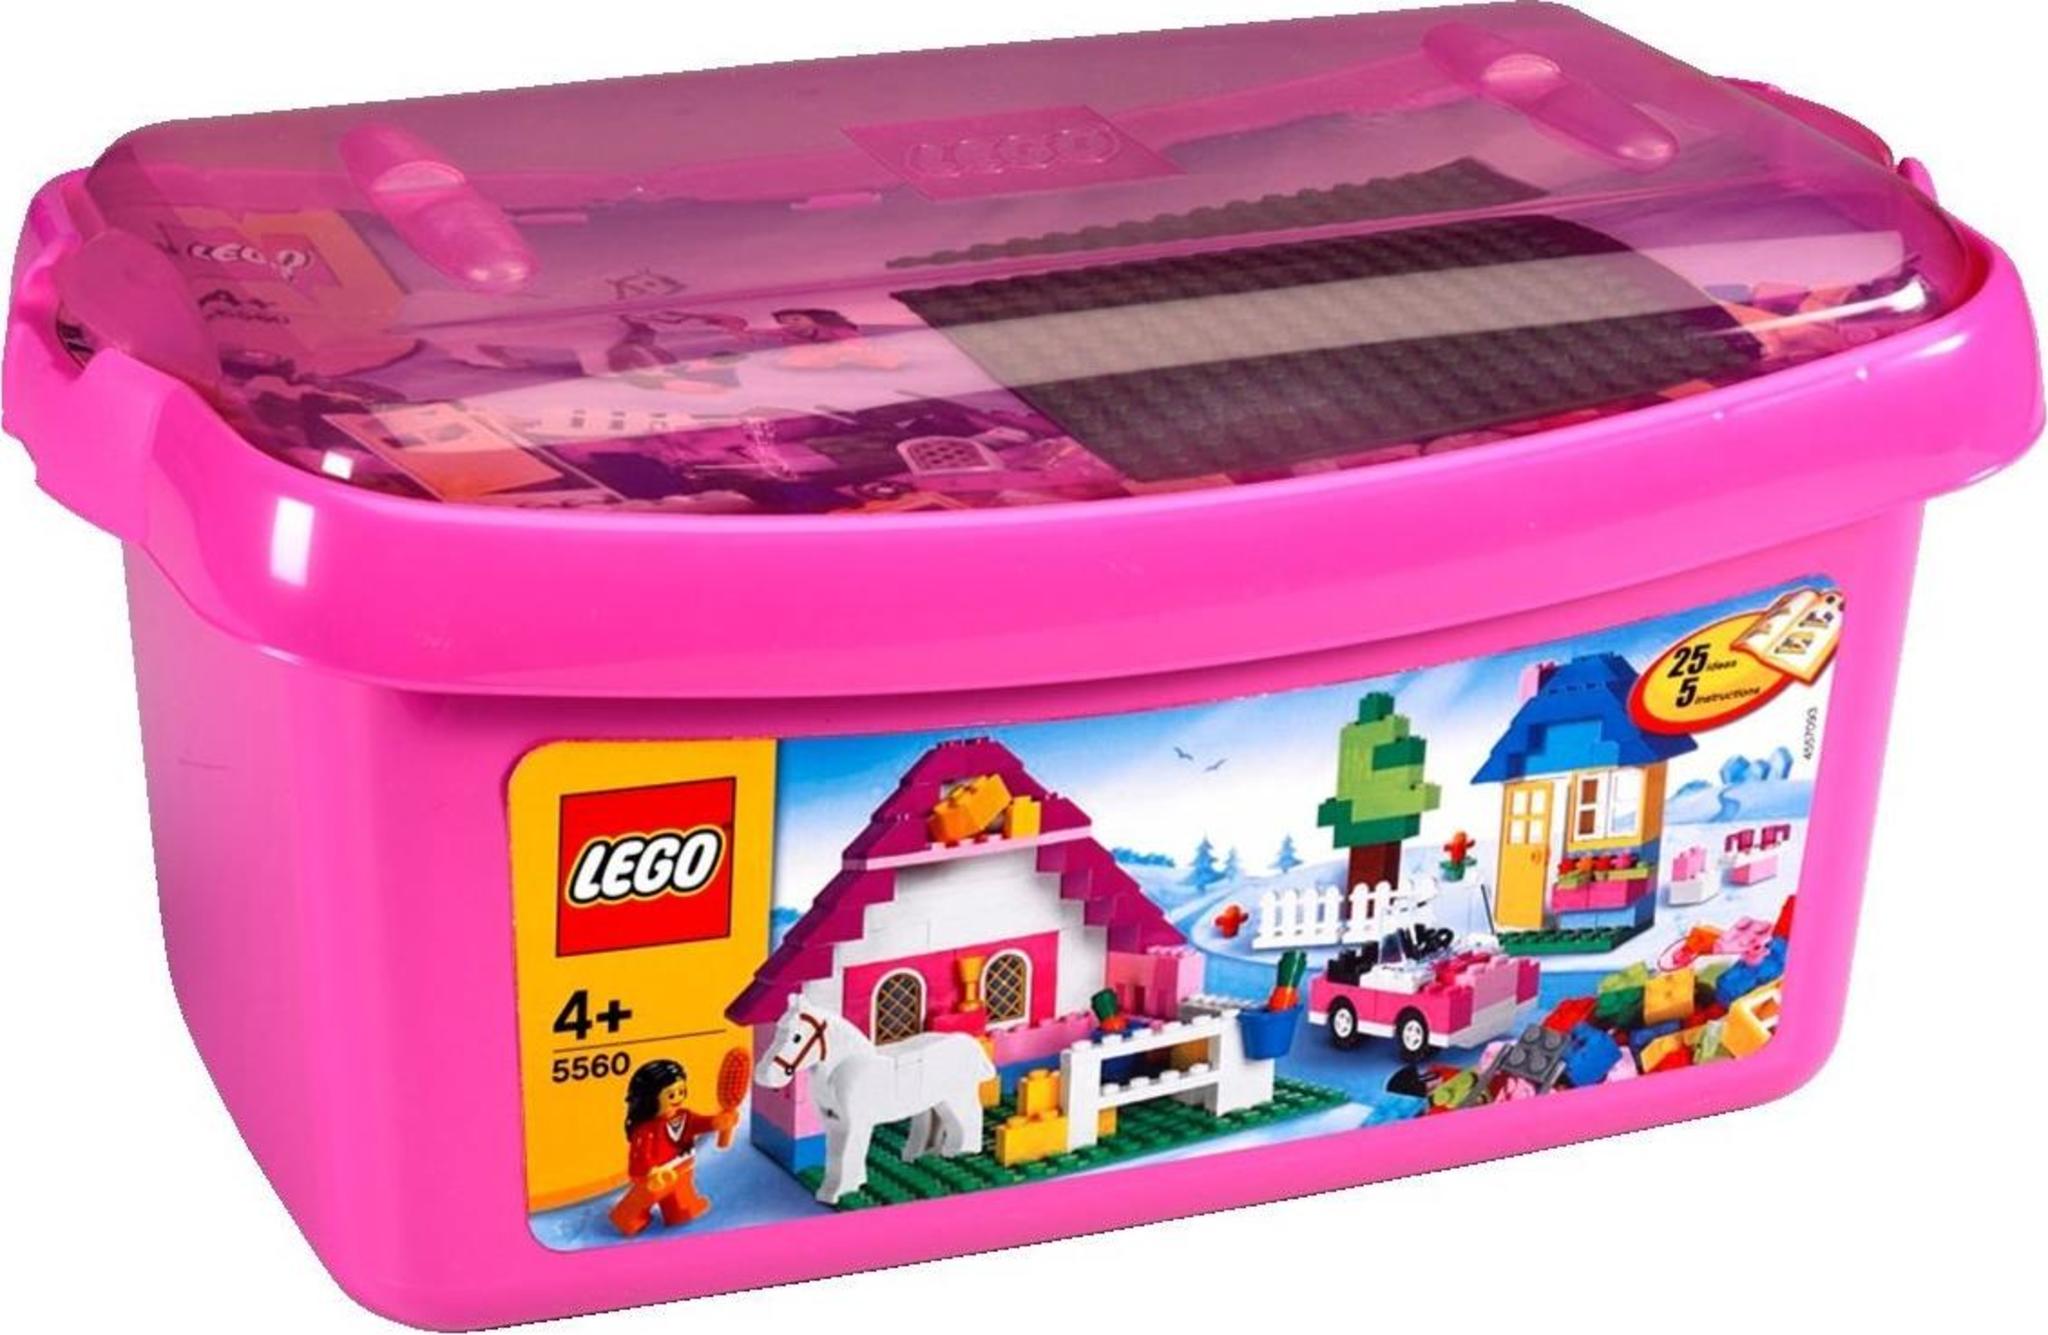 LEGO Bricks And More: Large Pink Brick Box (5560) for sale online